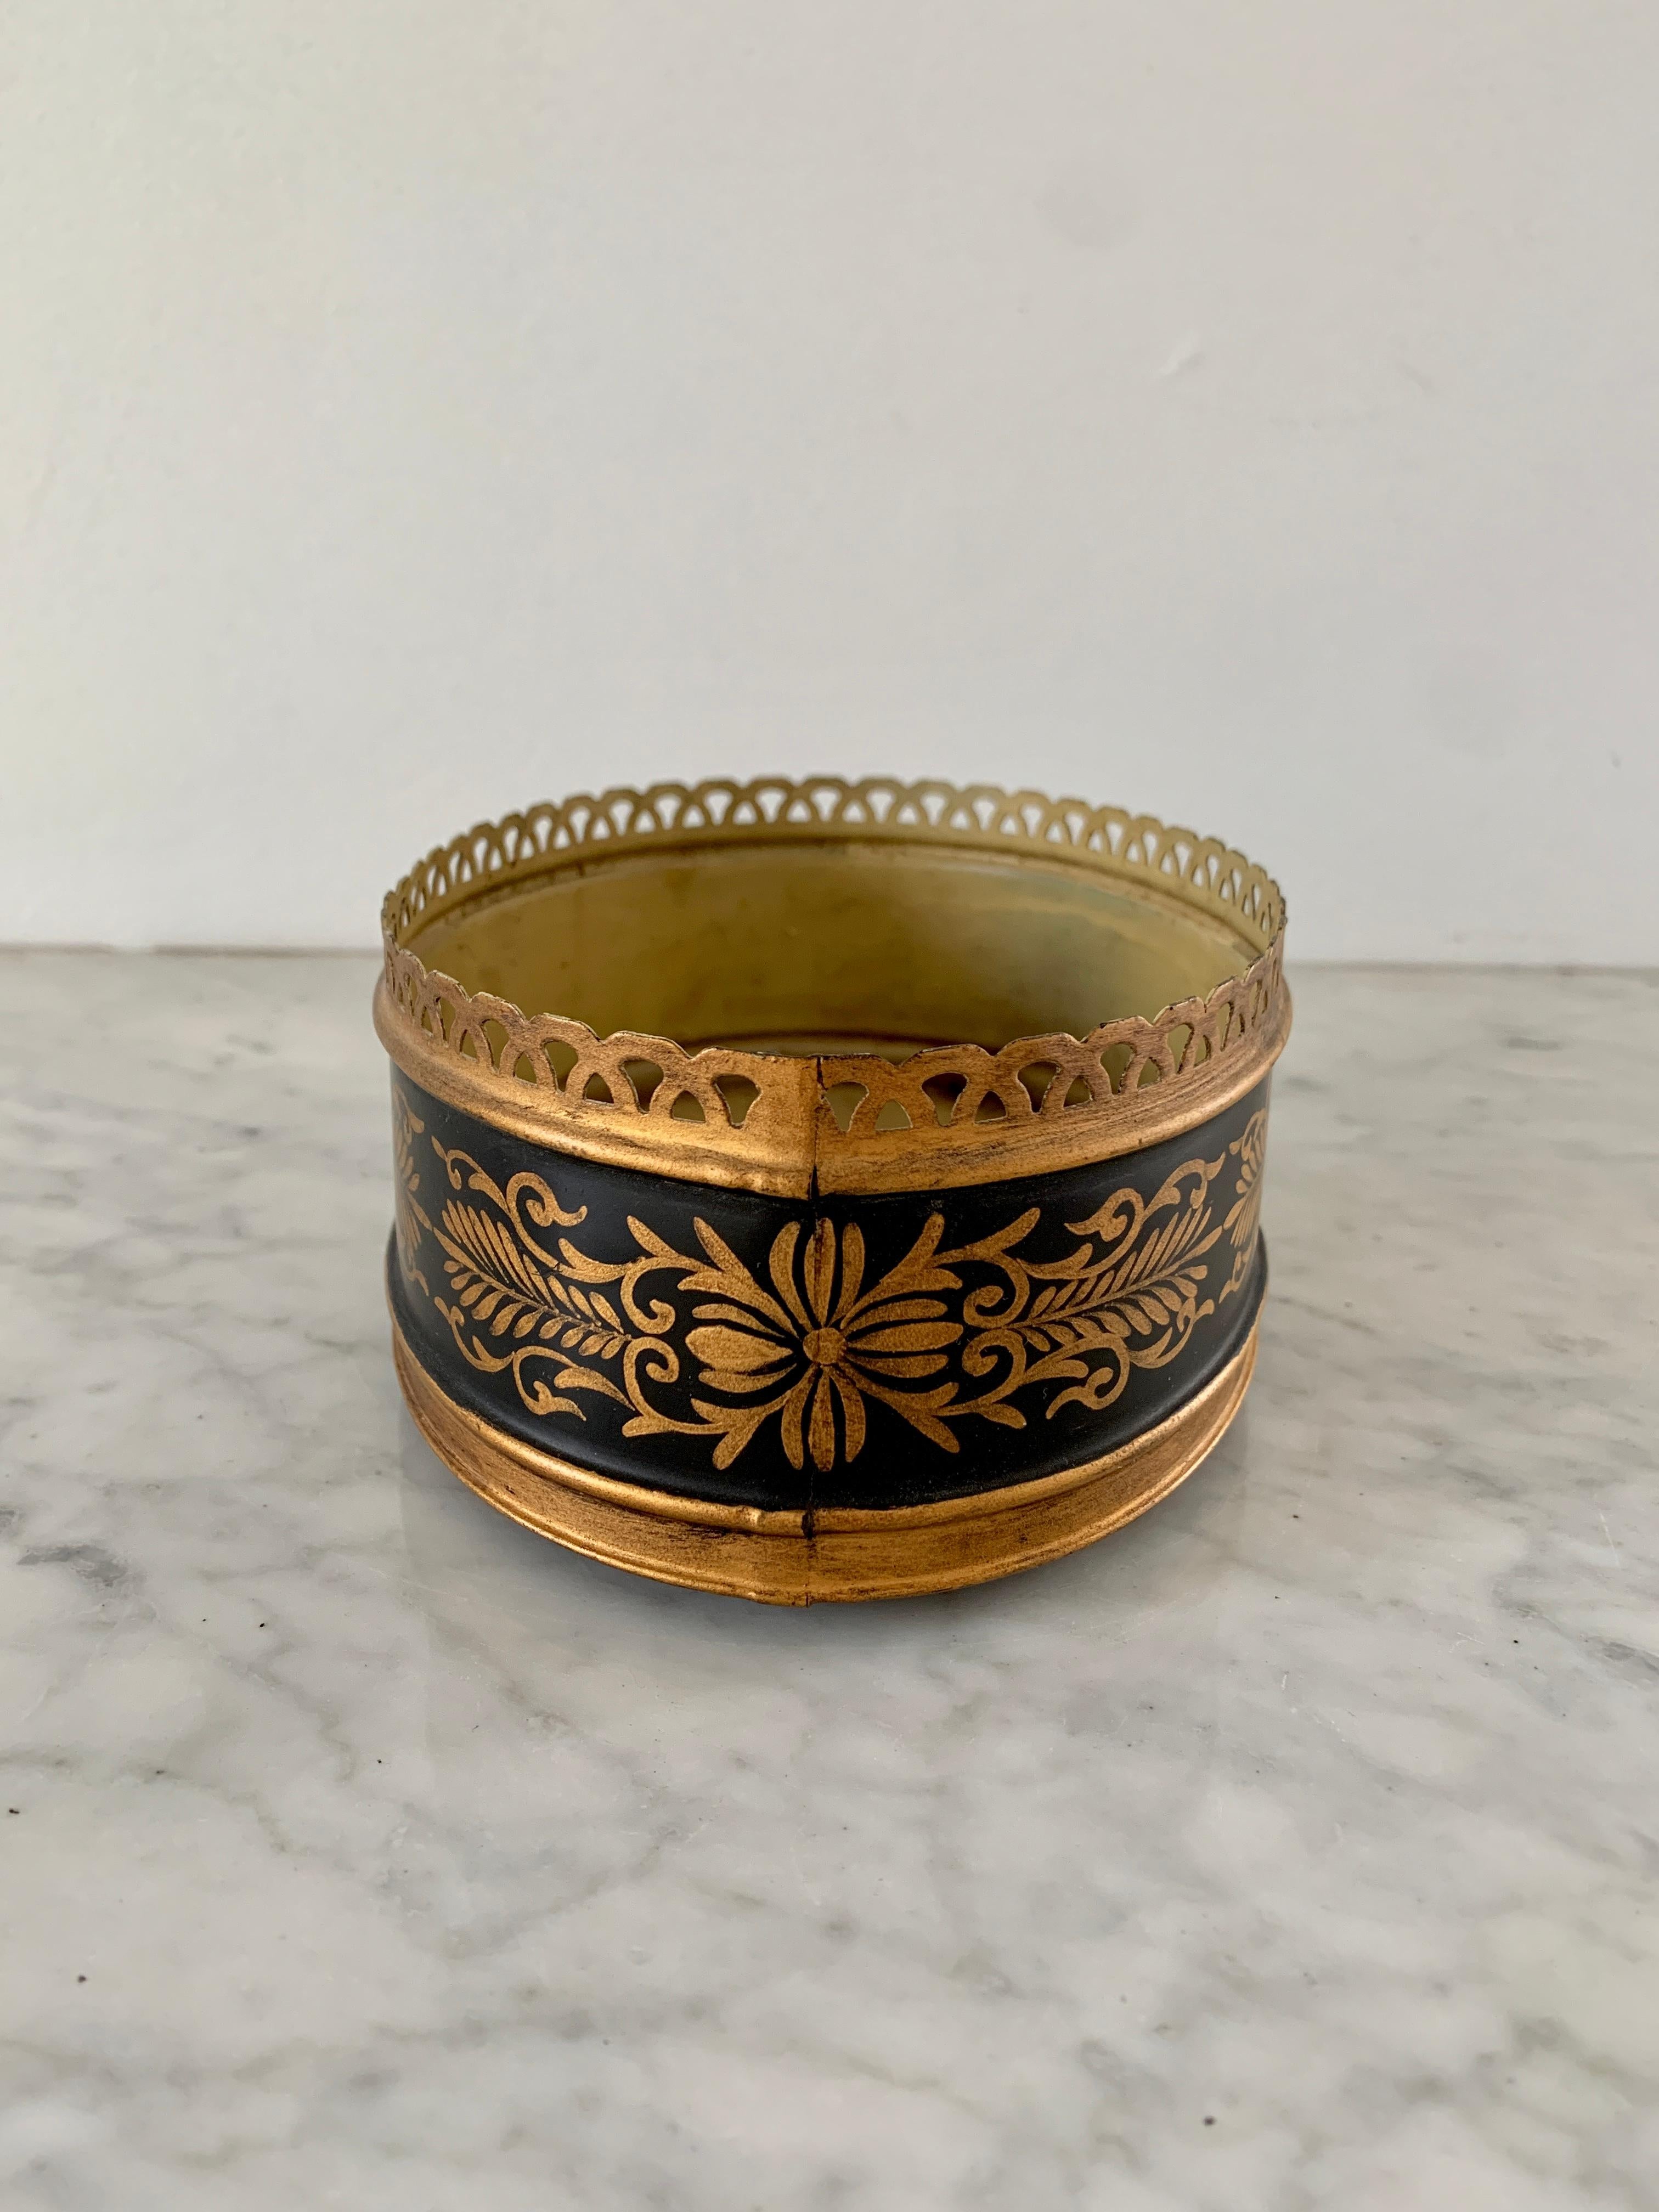 A gorgeous neoclassical or French Provincial black & gold tole cachepot, planter, or vase

France, circa 1980s

Measures: 6.75